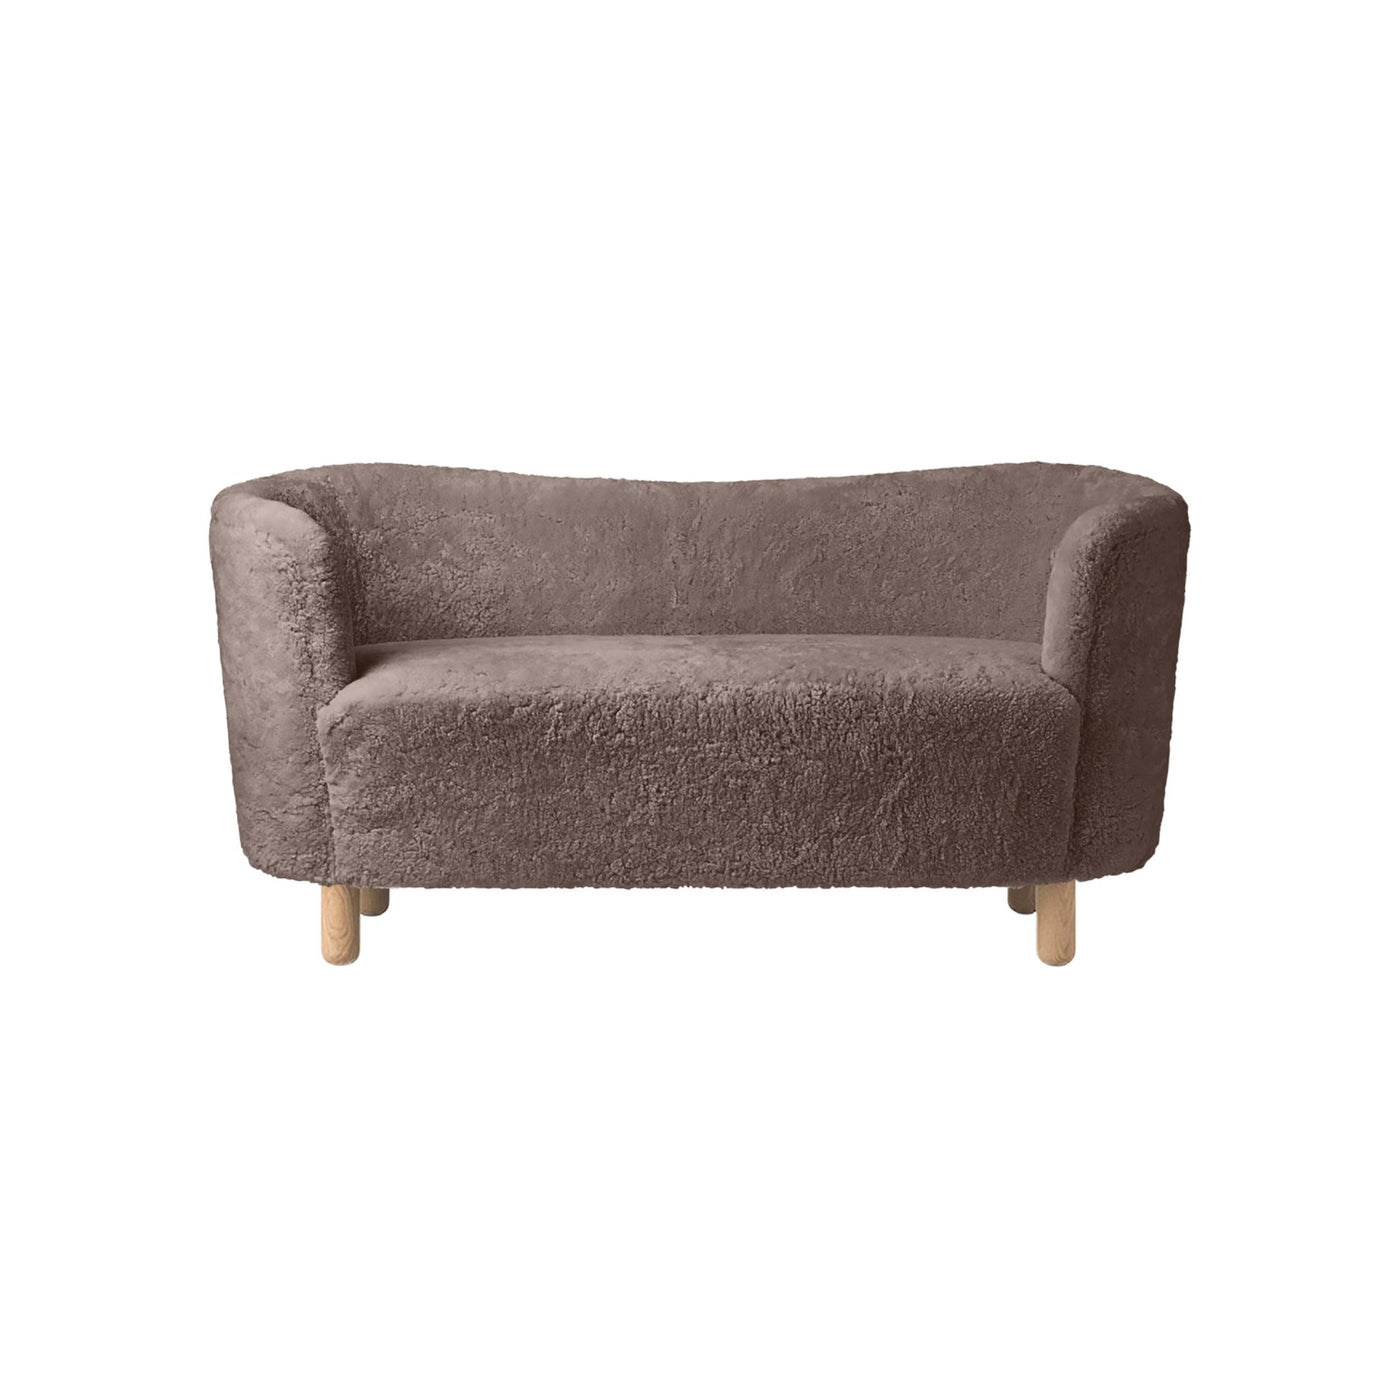 By Lassen Mingle sofa with natural oak legs. Made to order from someday designs. #colour_sheepskin-sahara